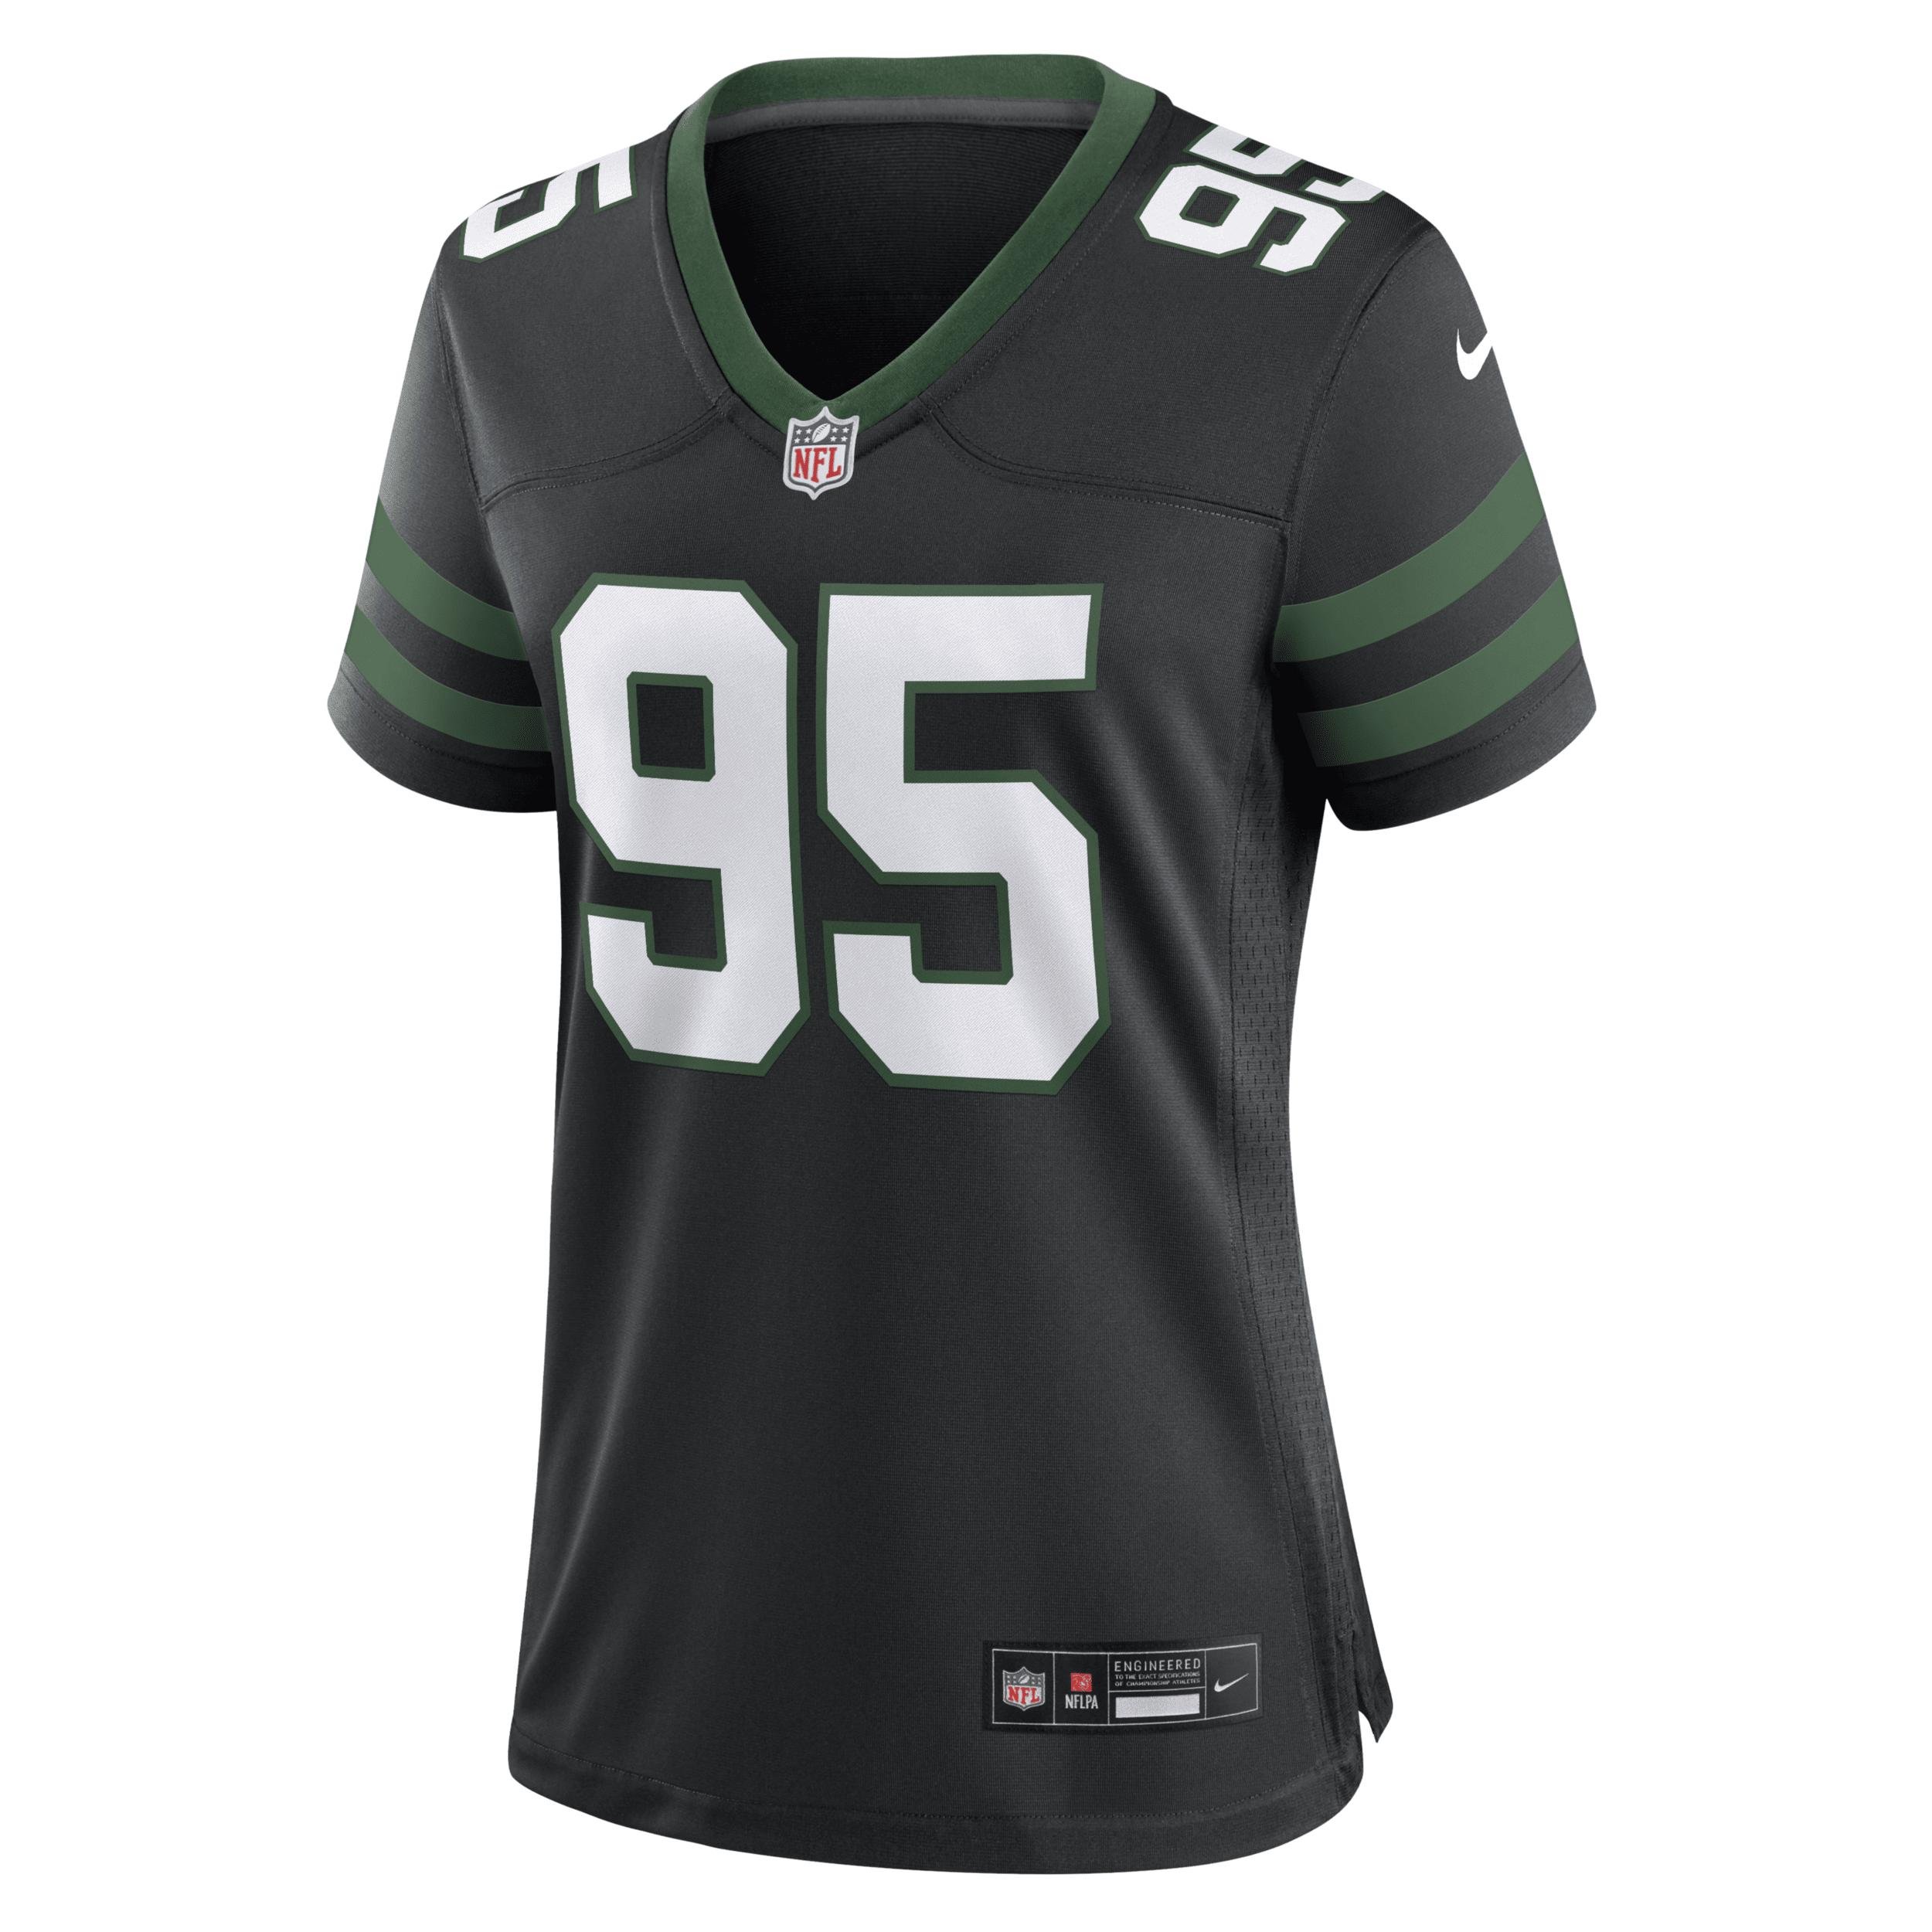 Quinnen Williams New York Jets Nike Women's NFL Game Football Jersey by NIKE